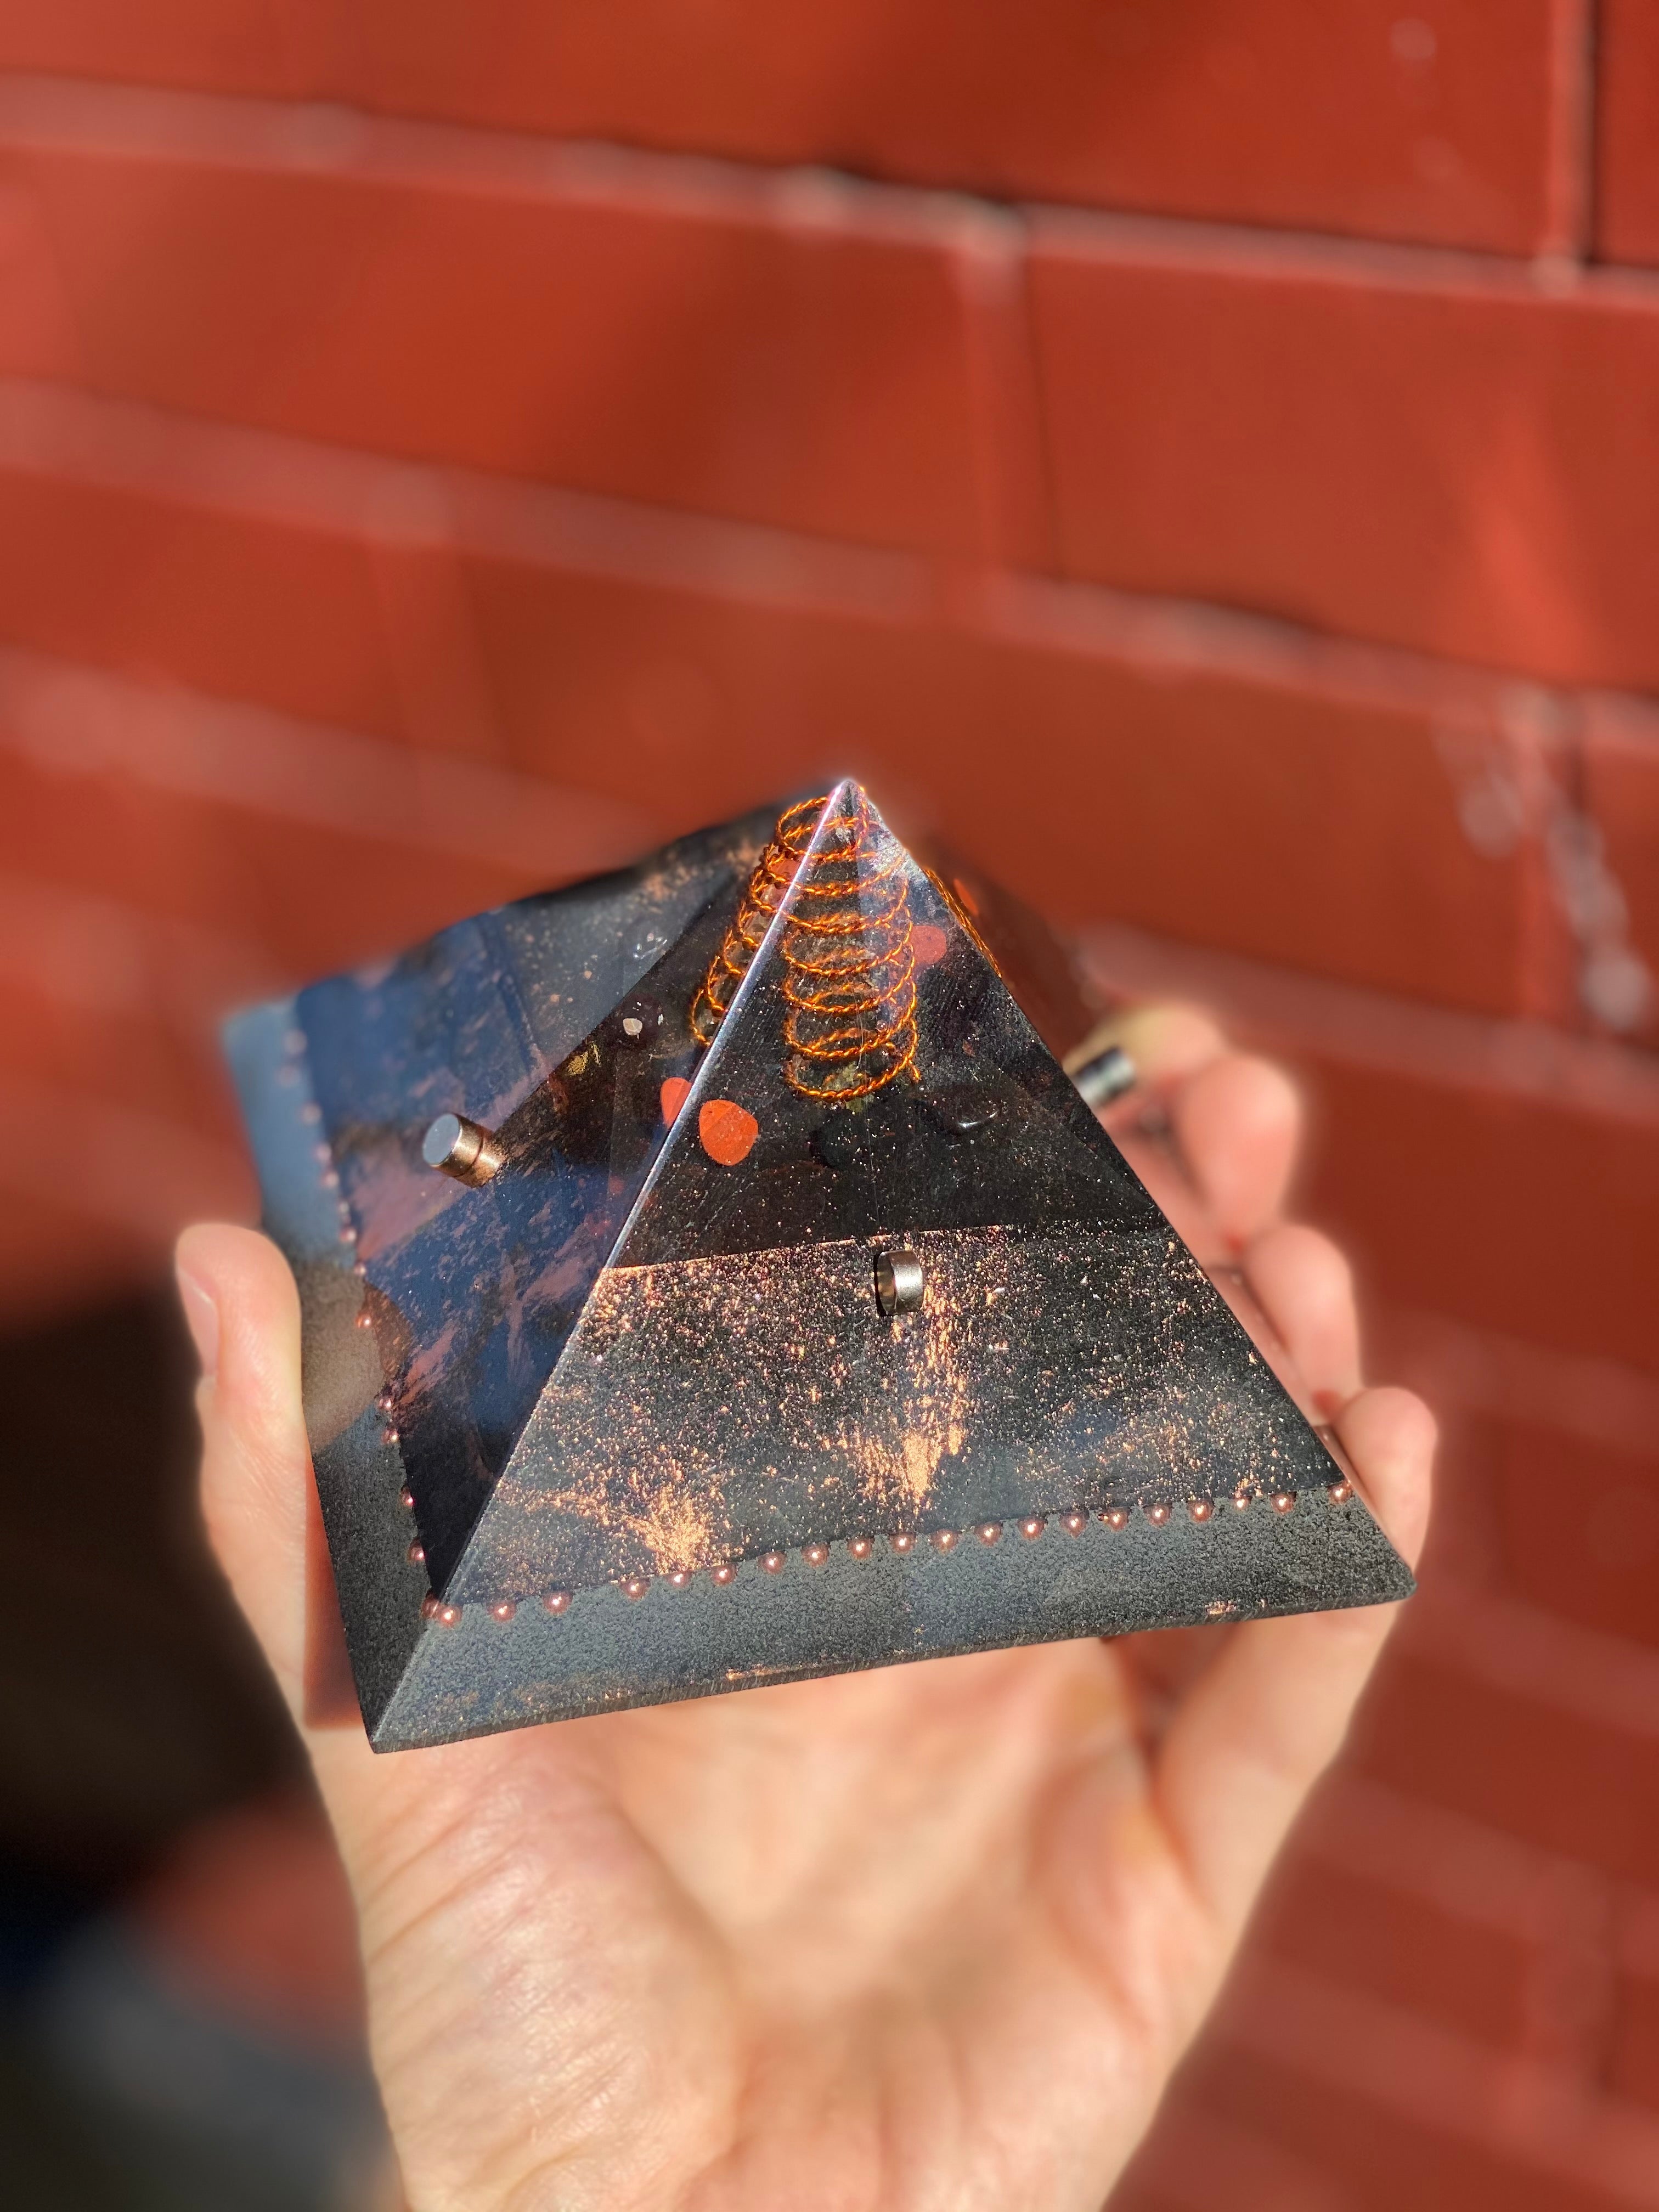 This Orgonite protection pyramid will help bring harmony to any static environment. A great remedy for electro smog from wifi routers and 5G cell towers.